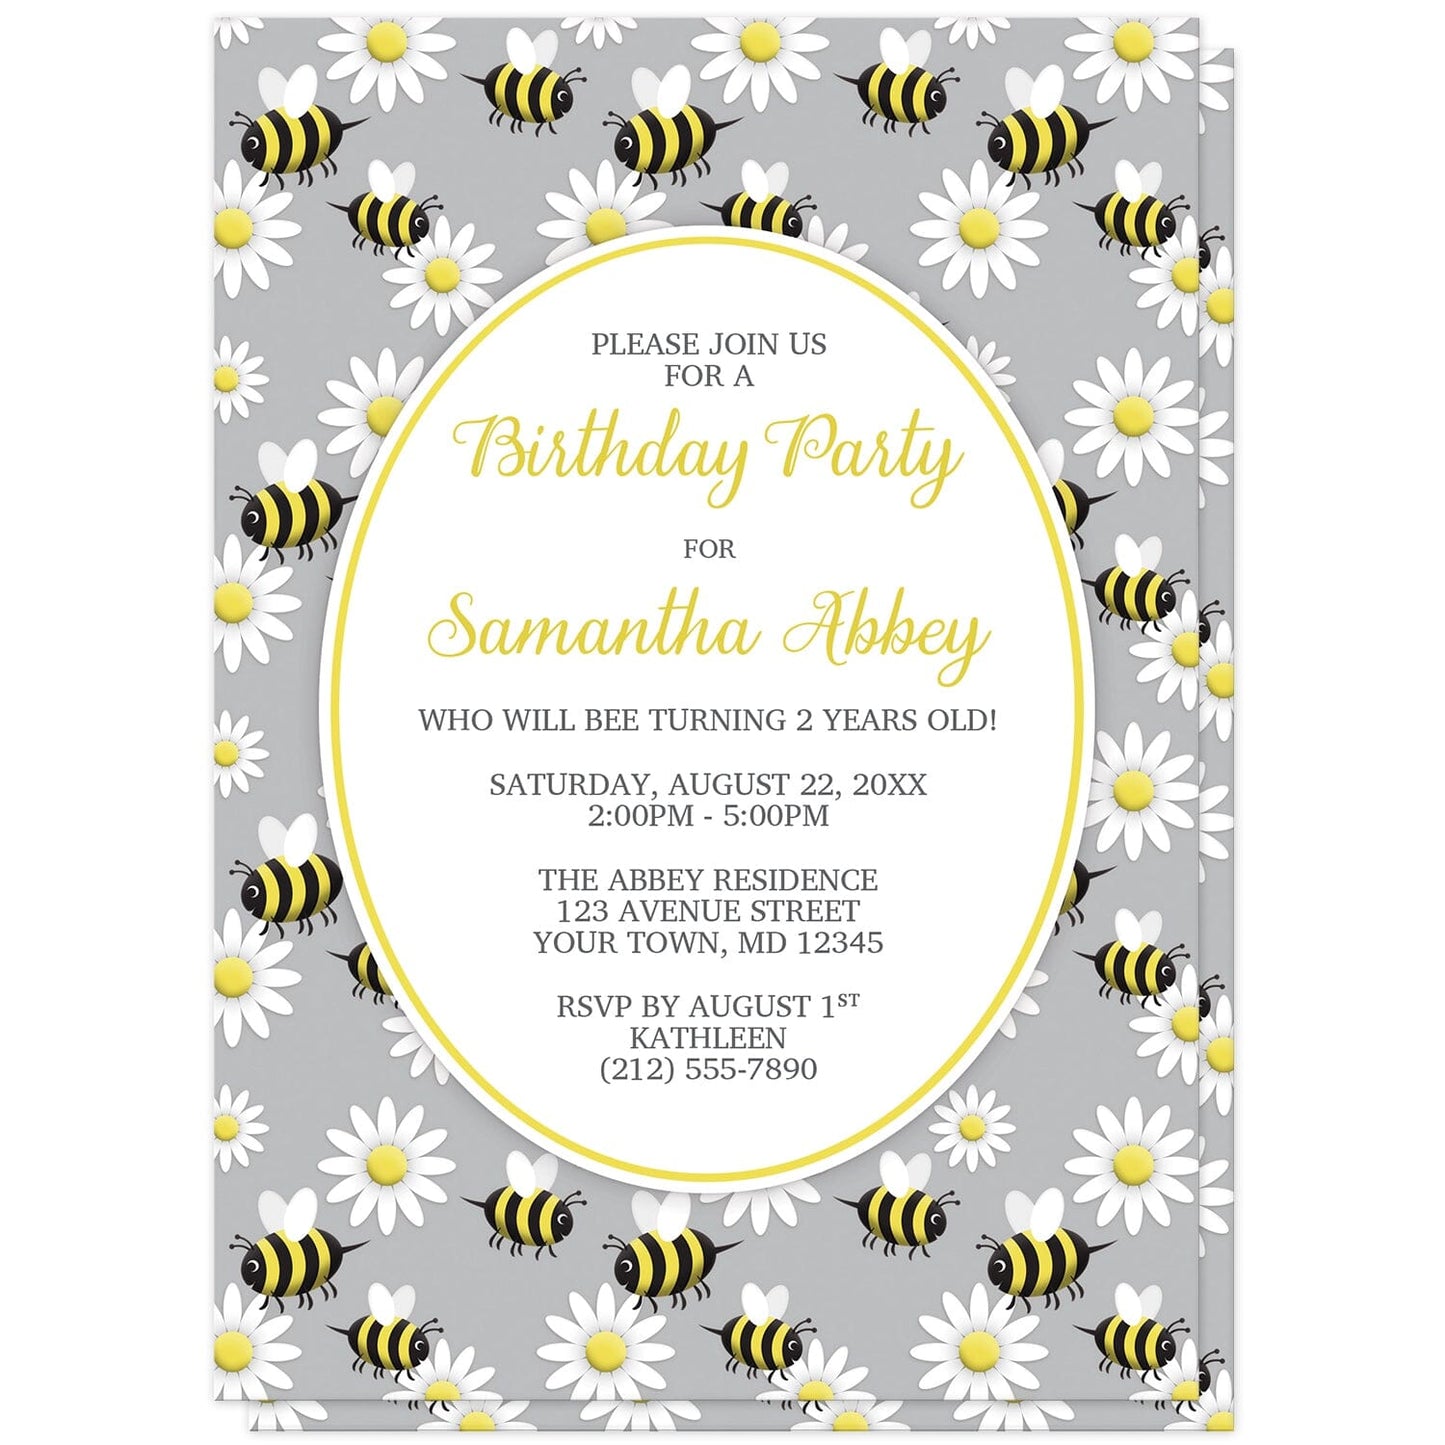 Happy Bee and Daisy Pattern Birthday Party Invitations at Artistically Invited. Happy bee and daisy pattern birthday party invitations with a background featuring a pattern of a yellow and black happy bees and white daisy flowers over gray. Your personalized birthday party details are custom printed in yellow and dark gray in a white oval outlined in yellow in the center.